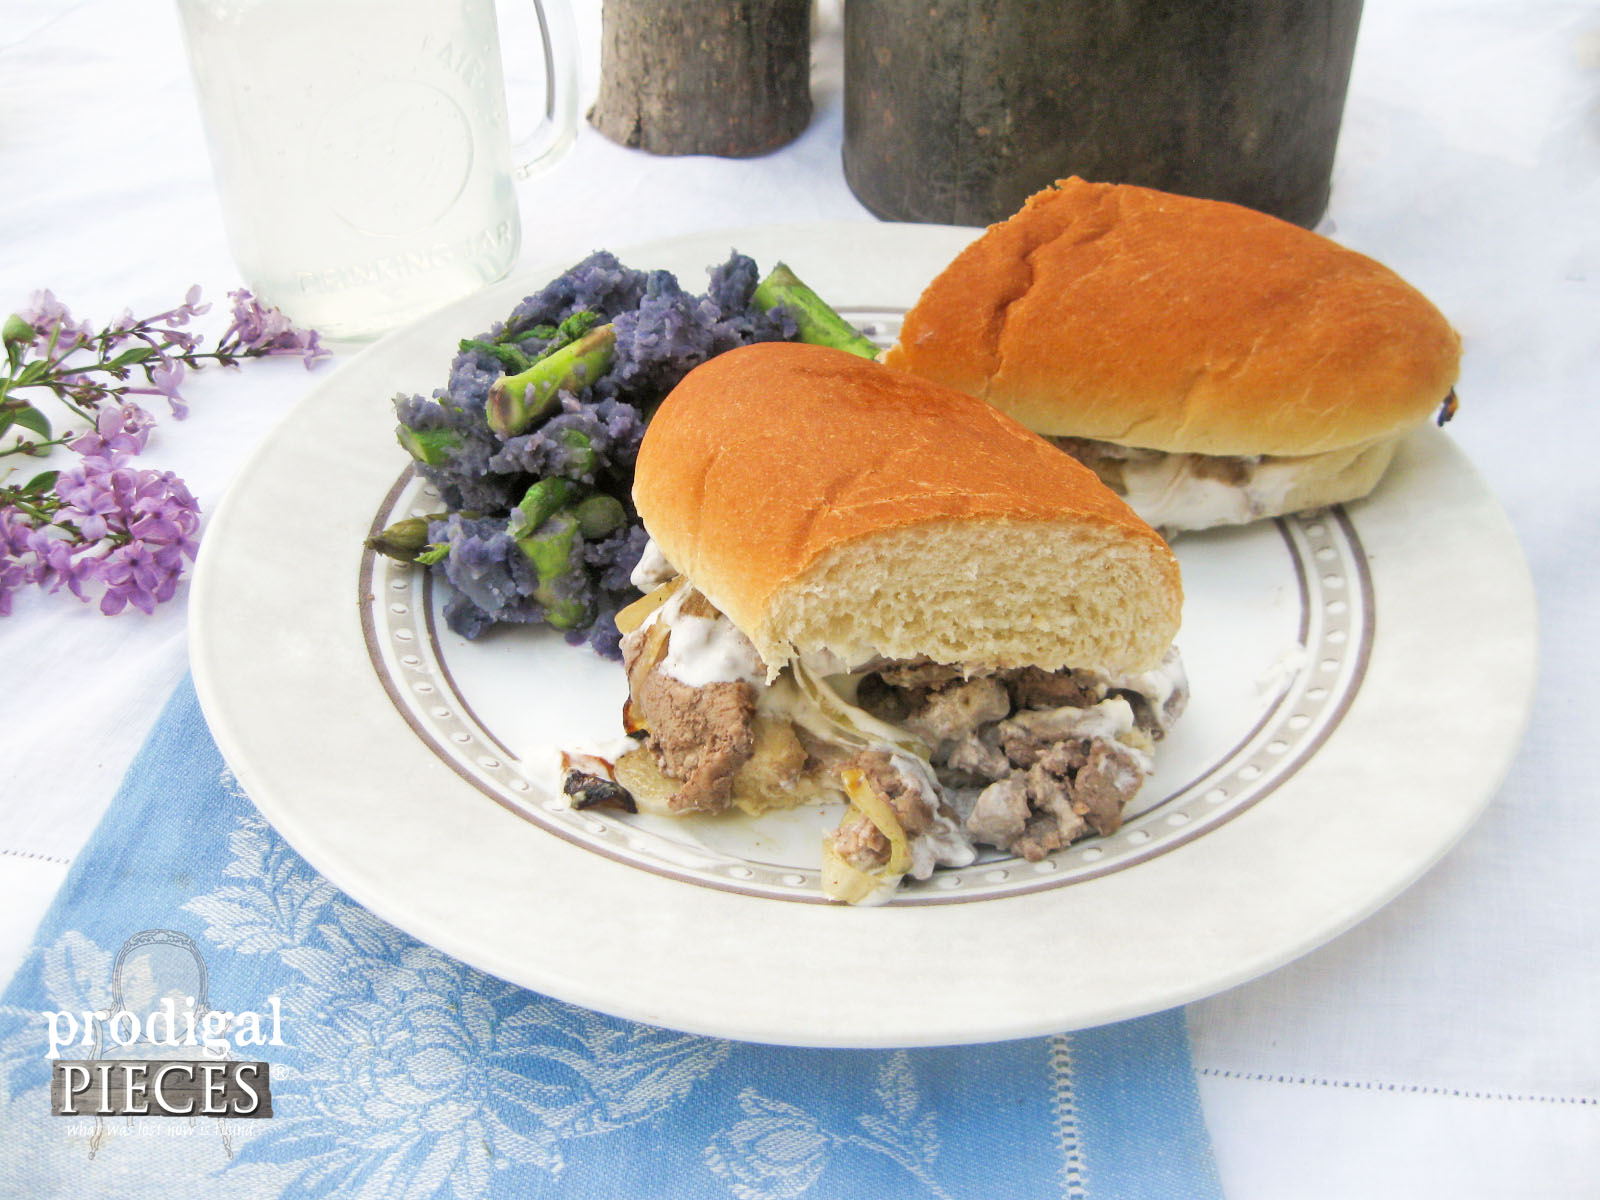 Seared Beef & Goat Cheese Sandwich with Mashed Purple Potatoes and Asparagus | Prodigal Pieces | www.prodigalpieces.com